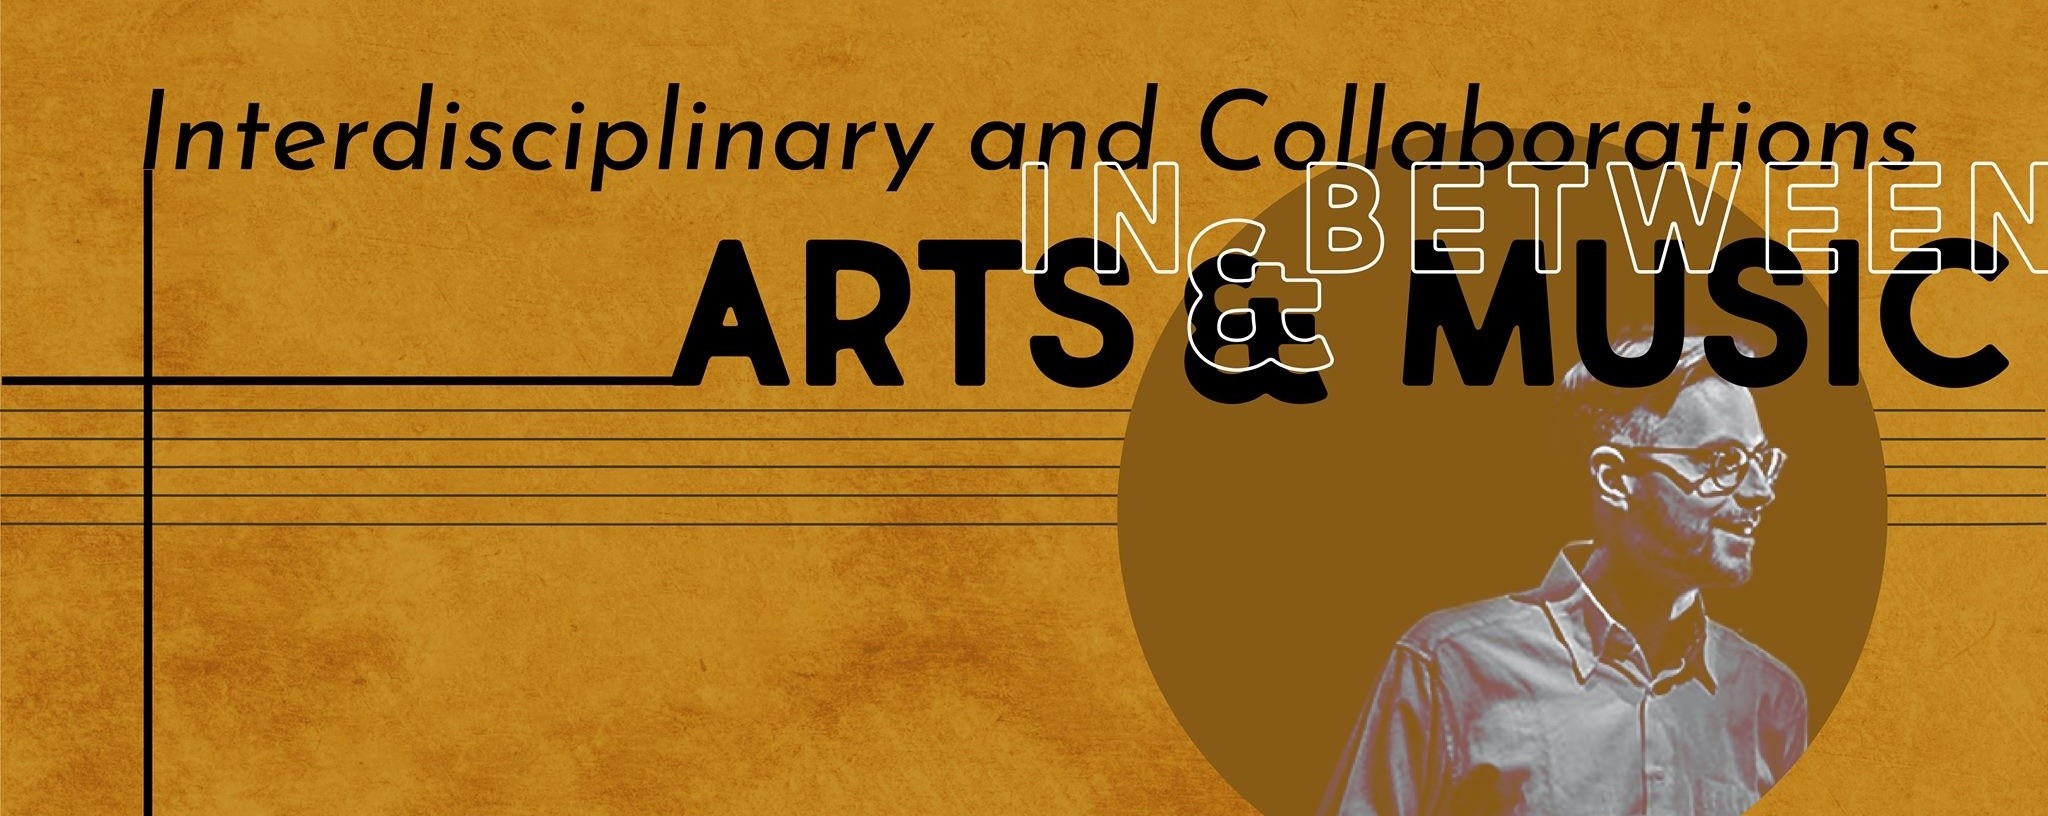 Interdisciplinary & Collaborations in & between the Arts & Music